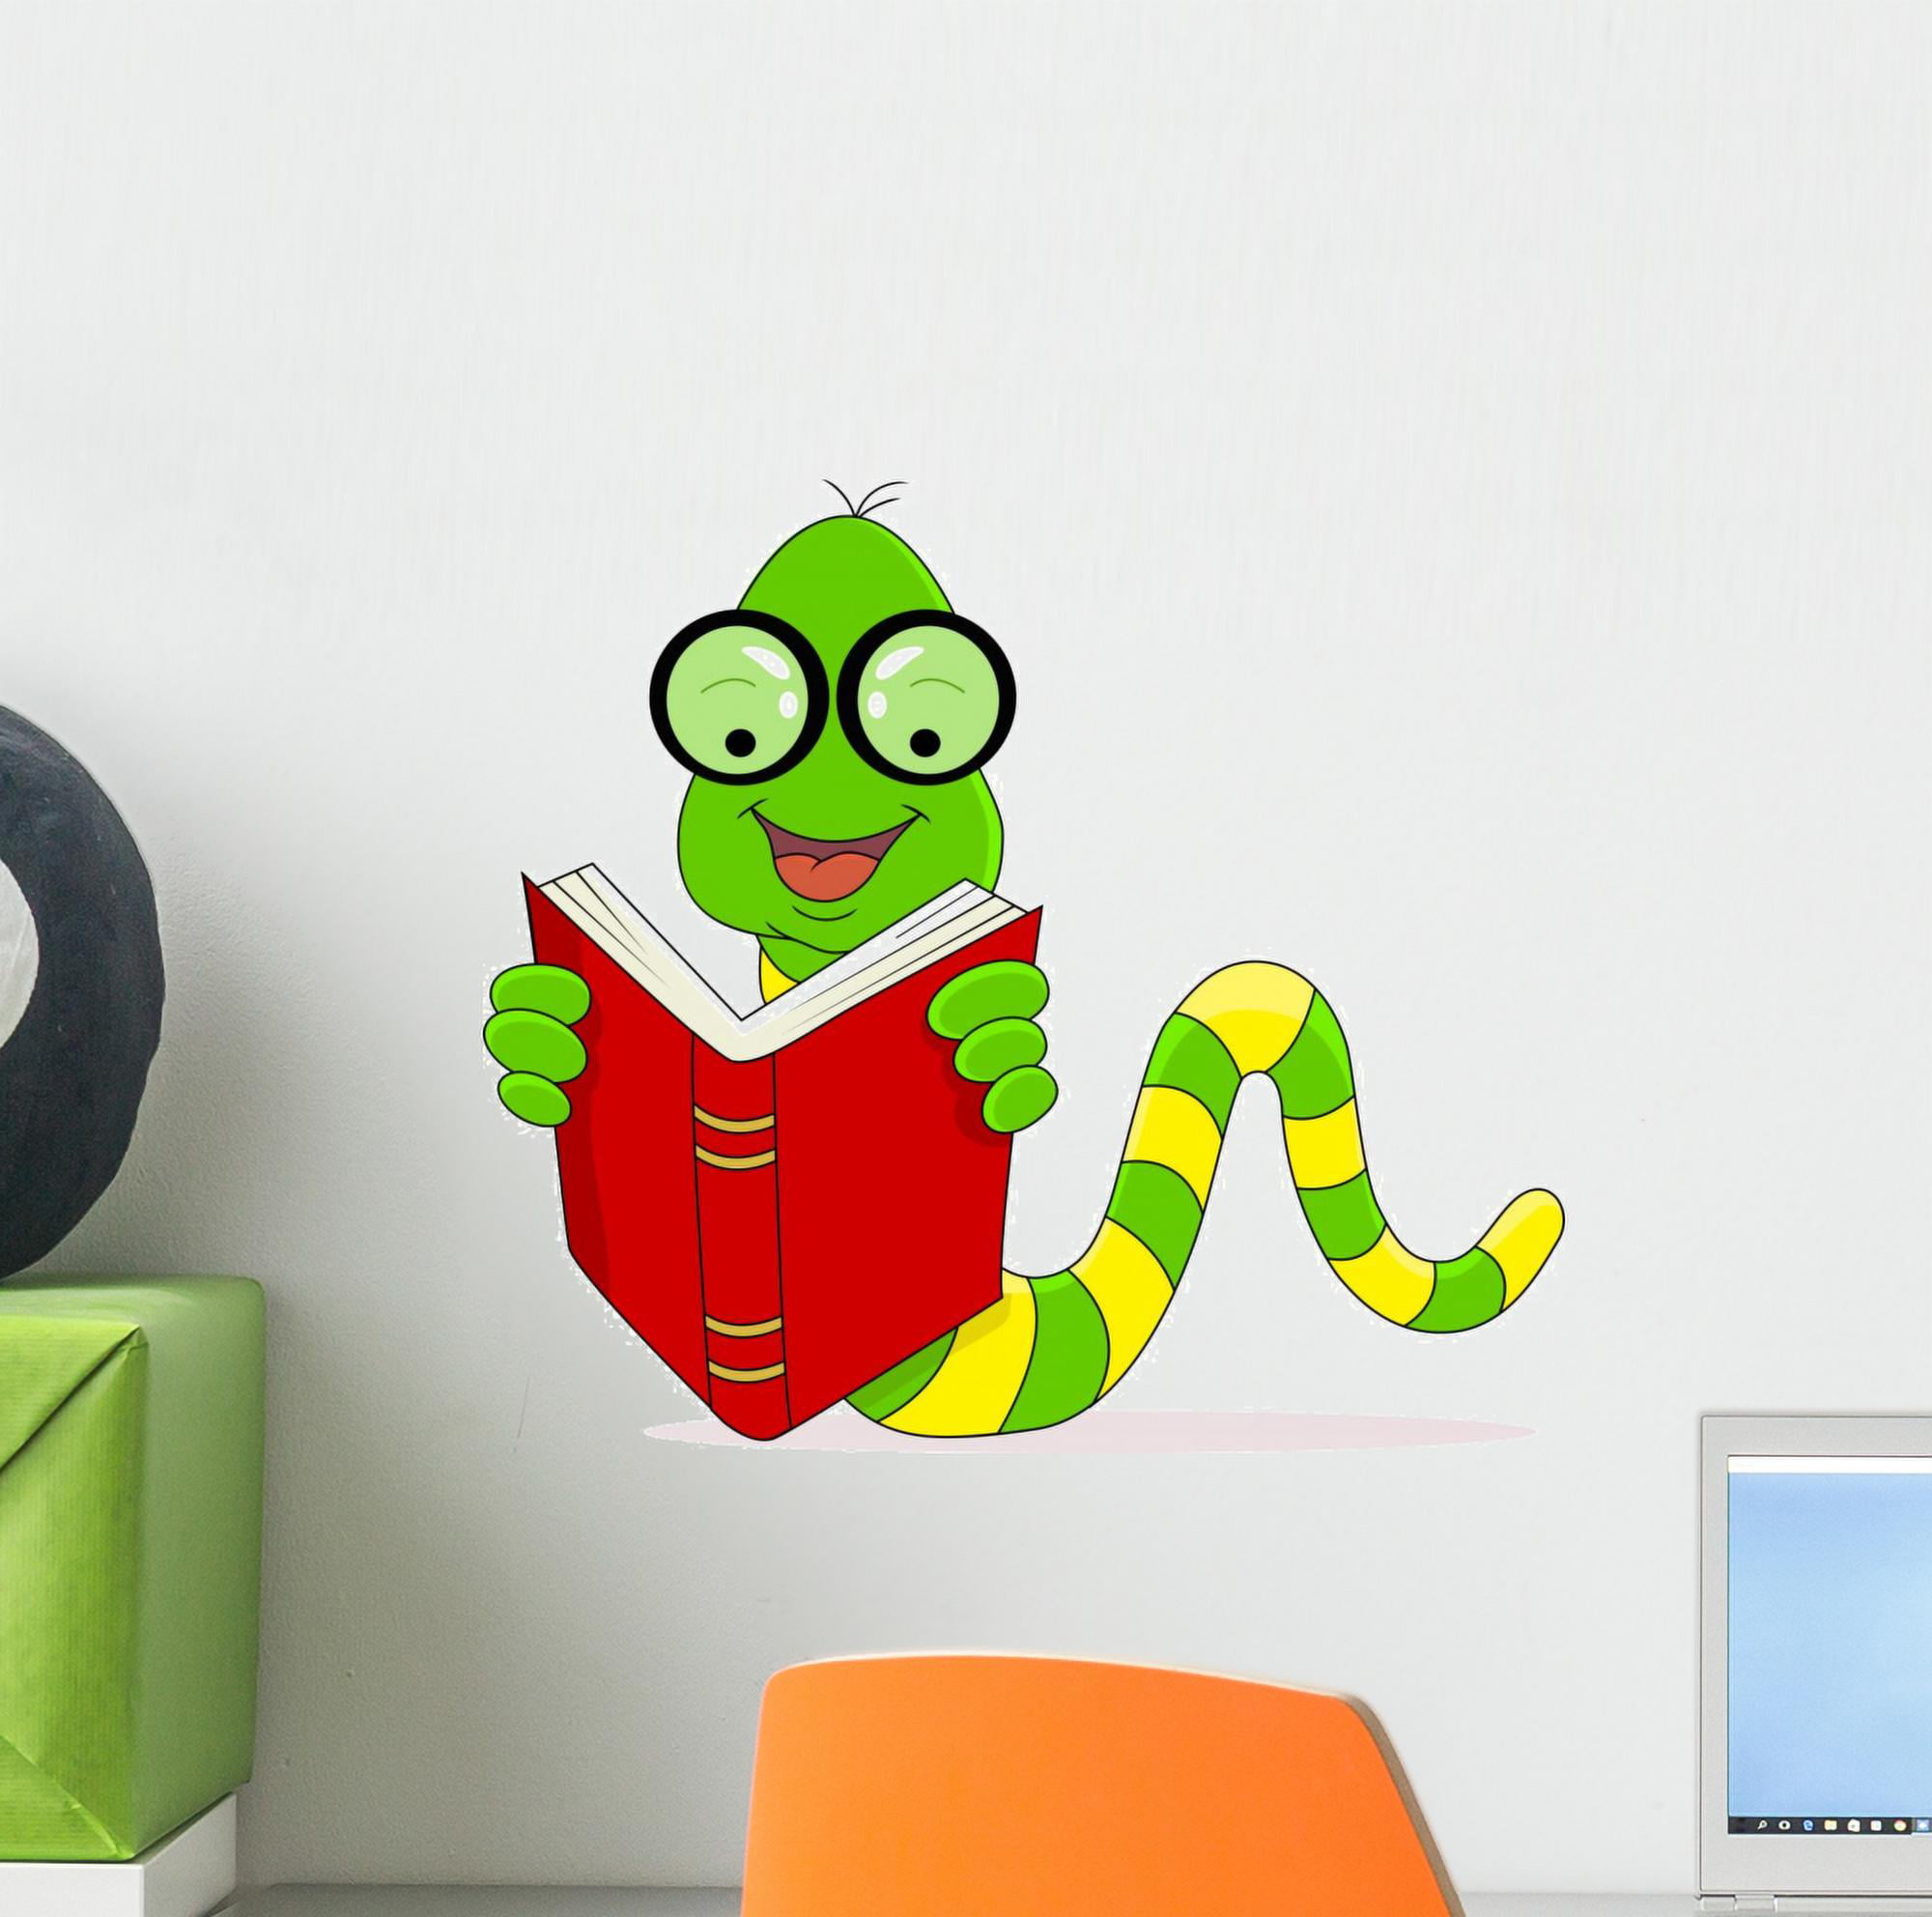 Happy Worm Reading Book Wall Decal Sticker by Wallmonkeys Vinyl Peel &  Stick Graphic for Boys (12 in W x 11 in H) 